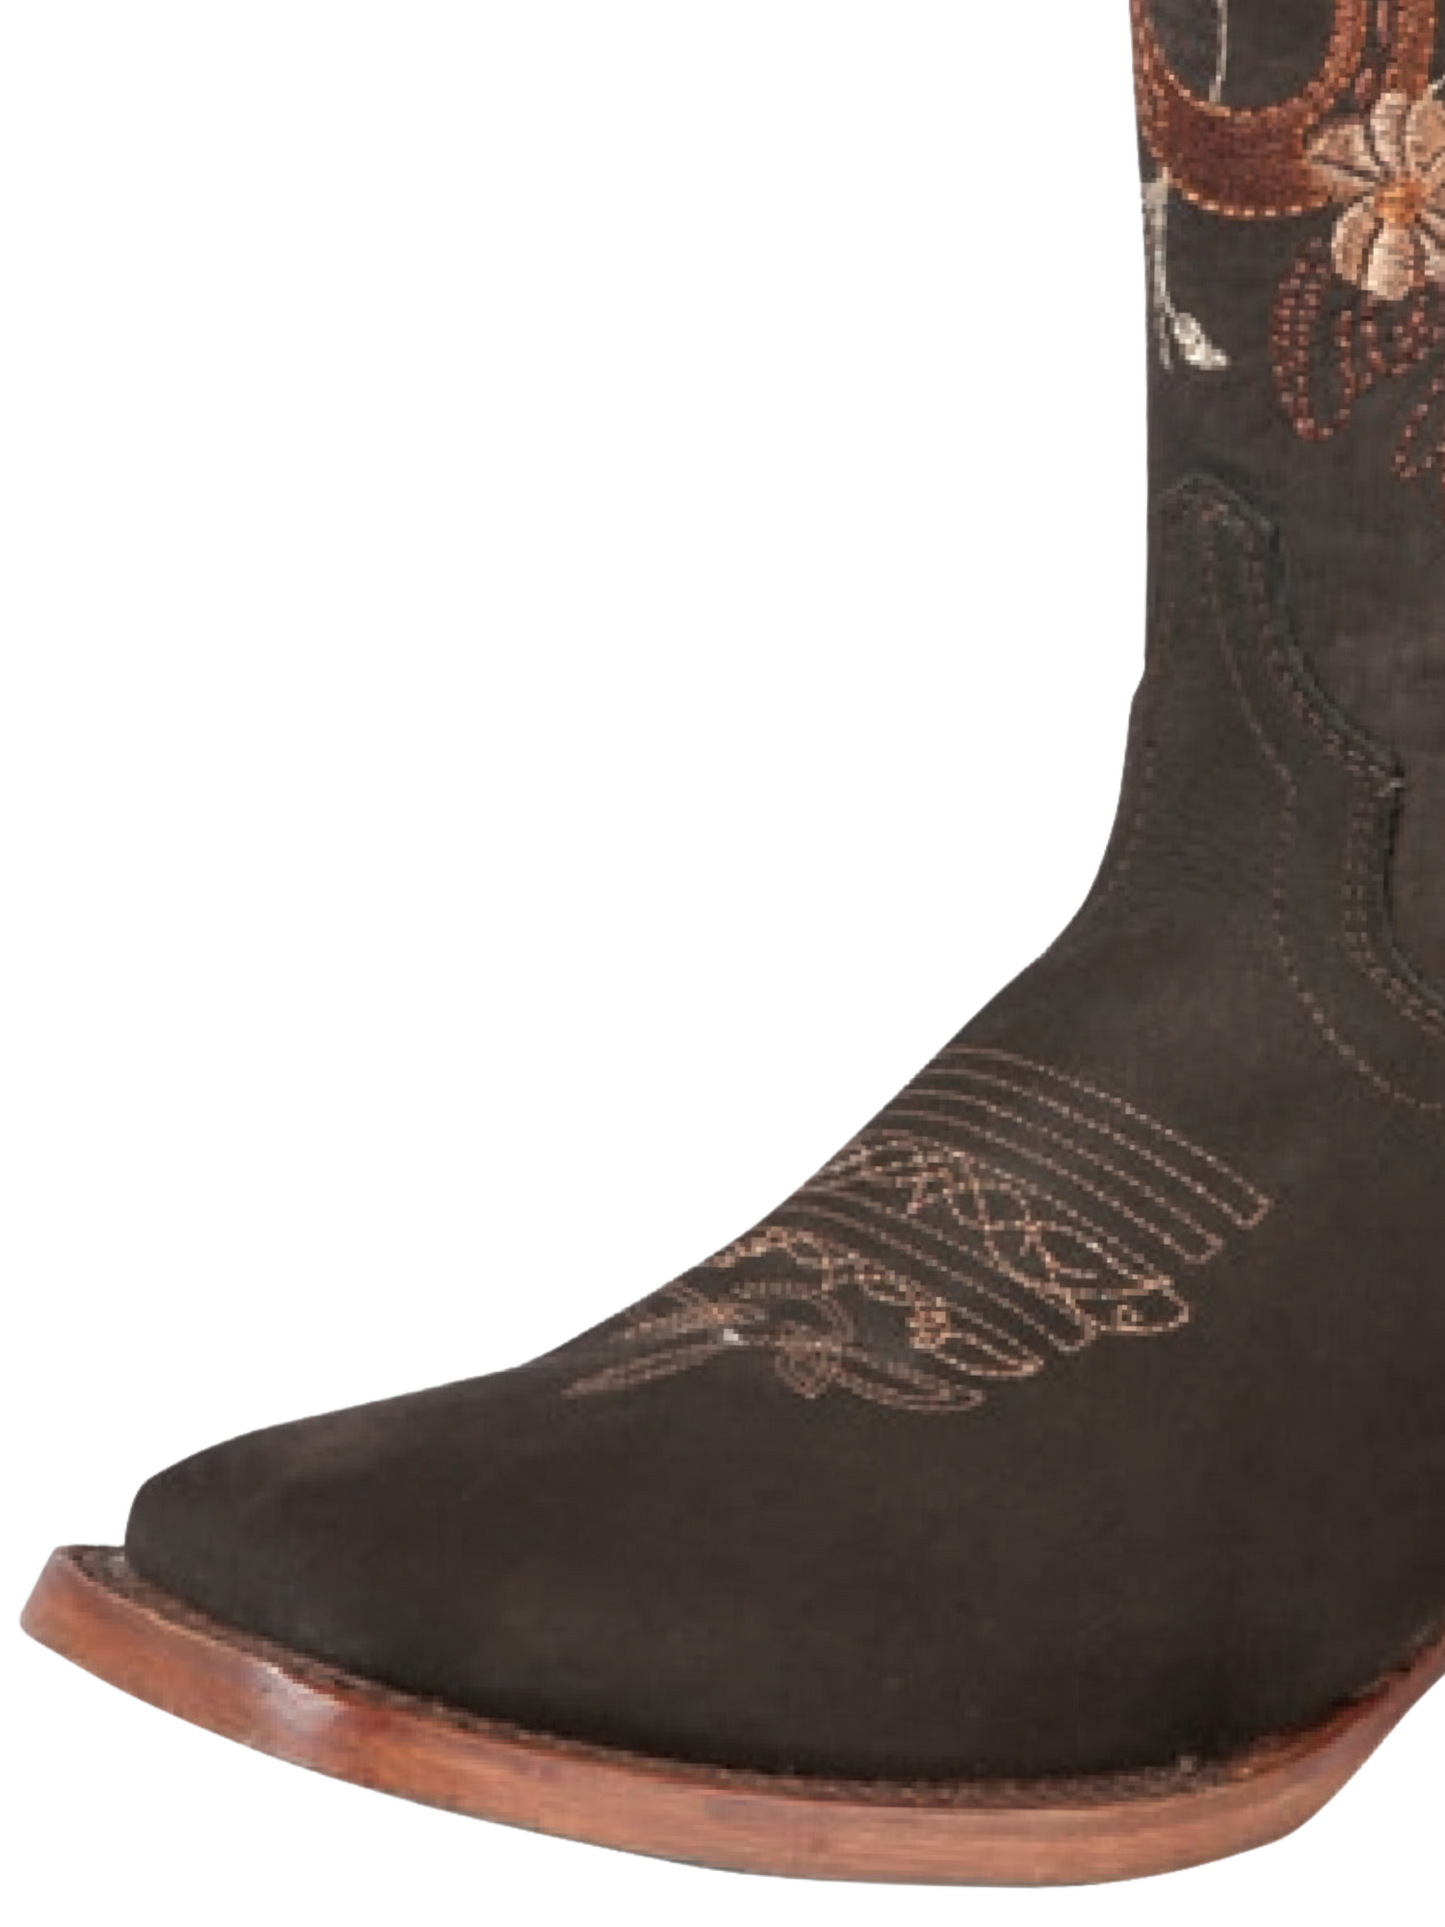 Rodeo Cowboy Boots with Nubuck Leather Flower Embroidery for Women 'El General' - ID: 44168